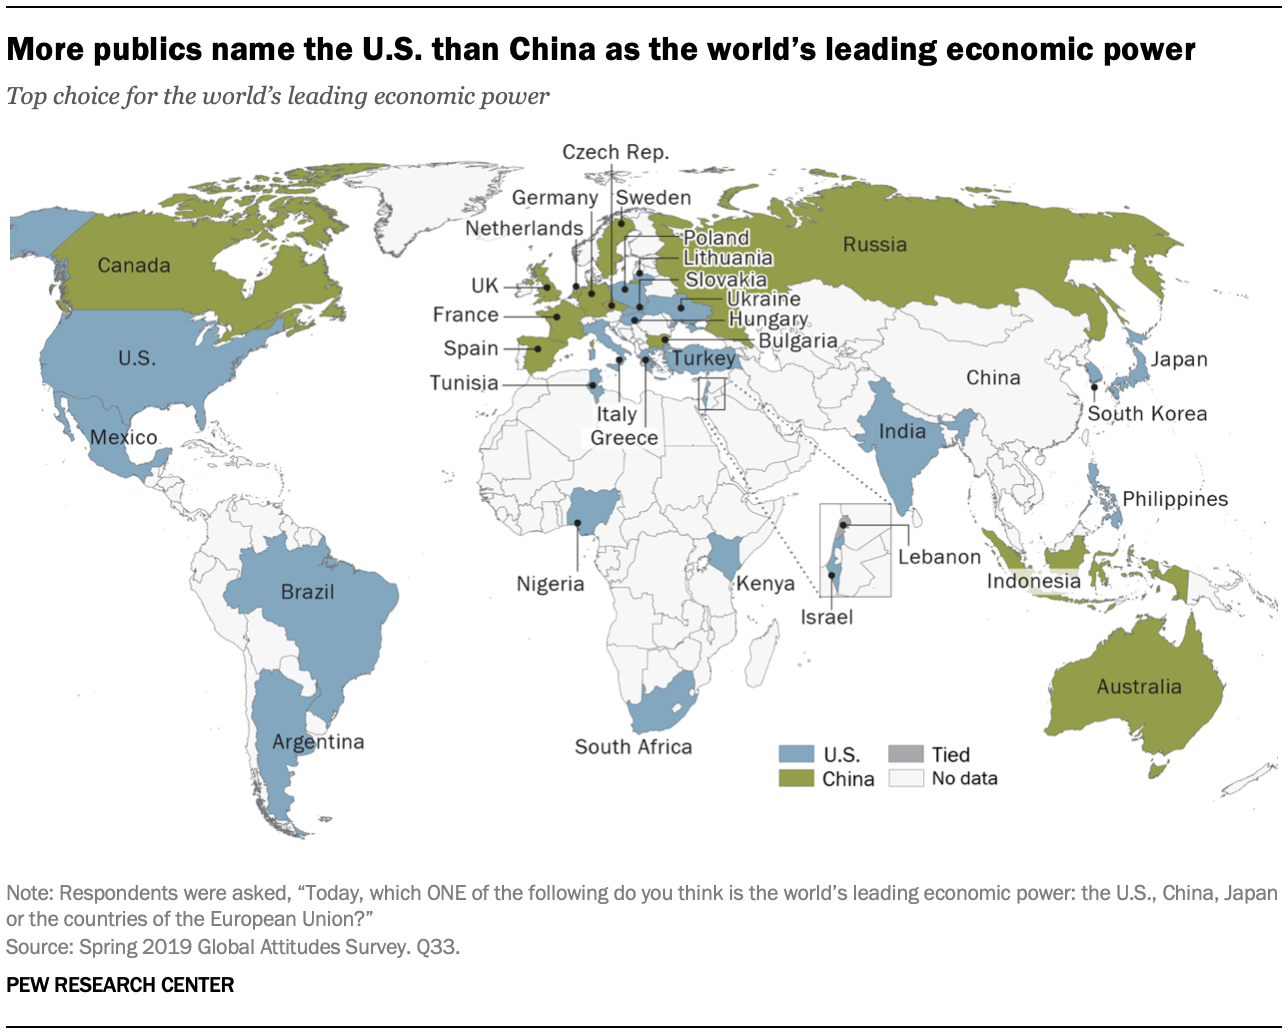 A map showing more publics name the U.S. than China as the world’s leading economic power